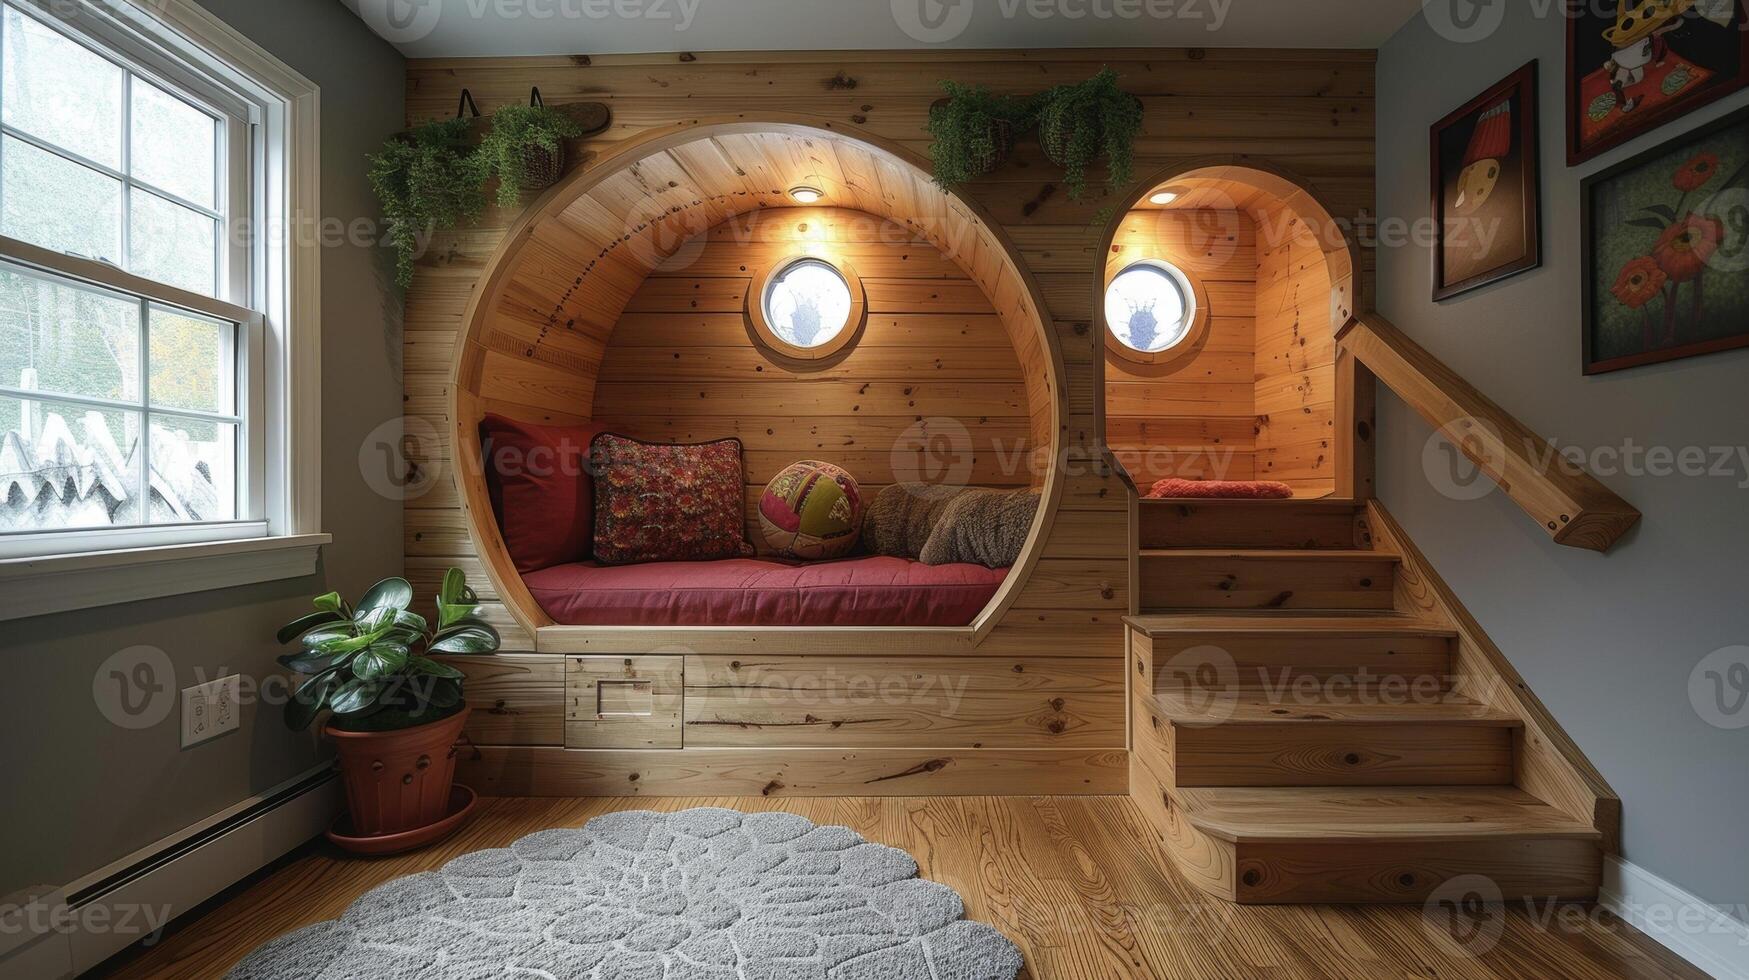 A cozy builtin playhouse nestled in the corner of a room complete with a slide and secret hideaway spots photo